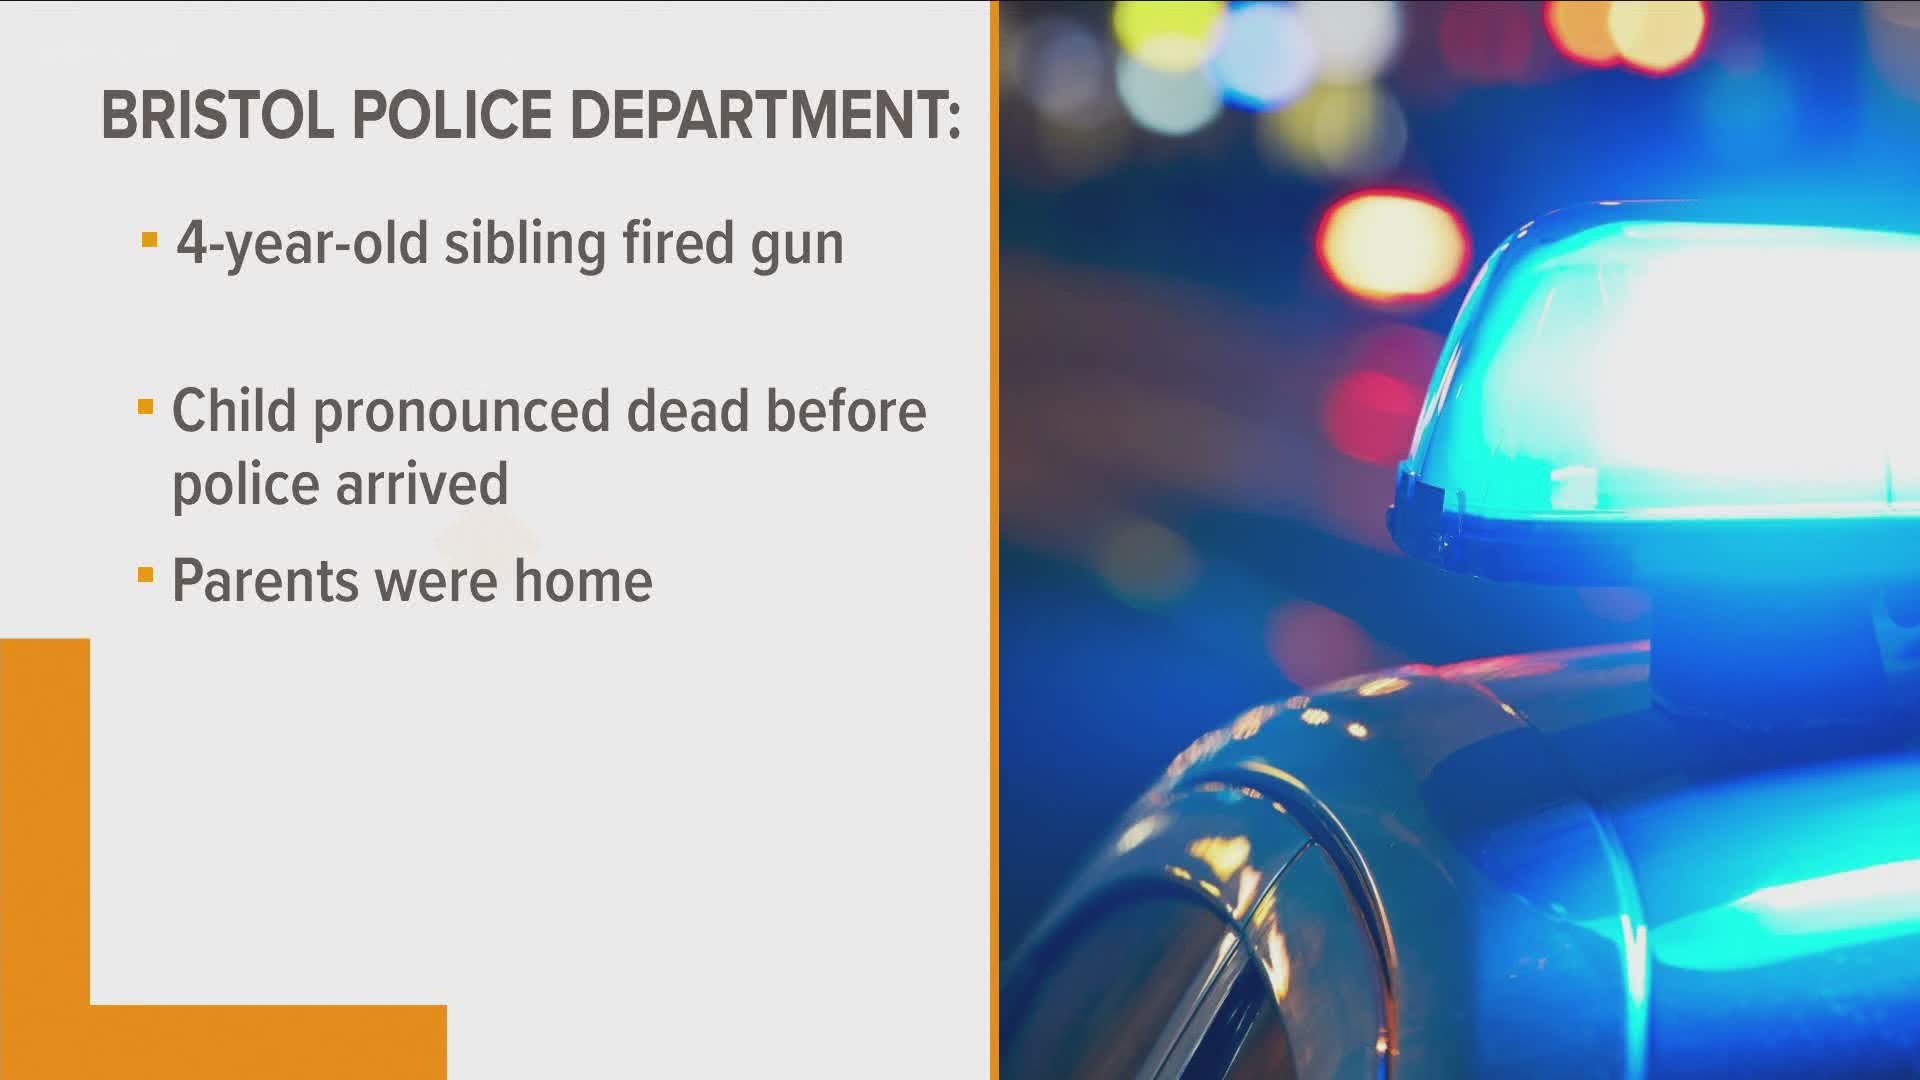 A 2 year-old has died after police said the child's 4-year-old sibling accidentally shot the child to death Saturday night in Bristol, Tenn.